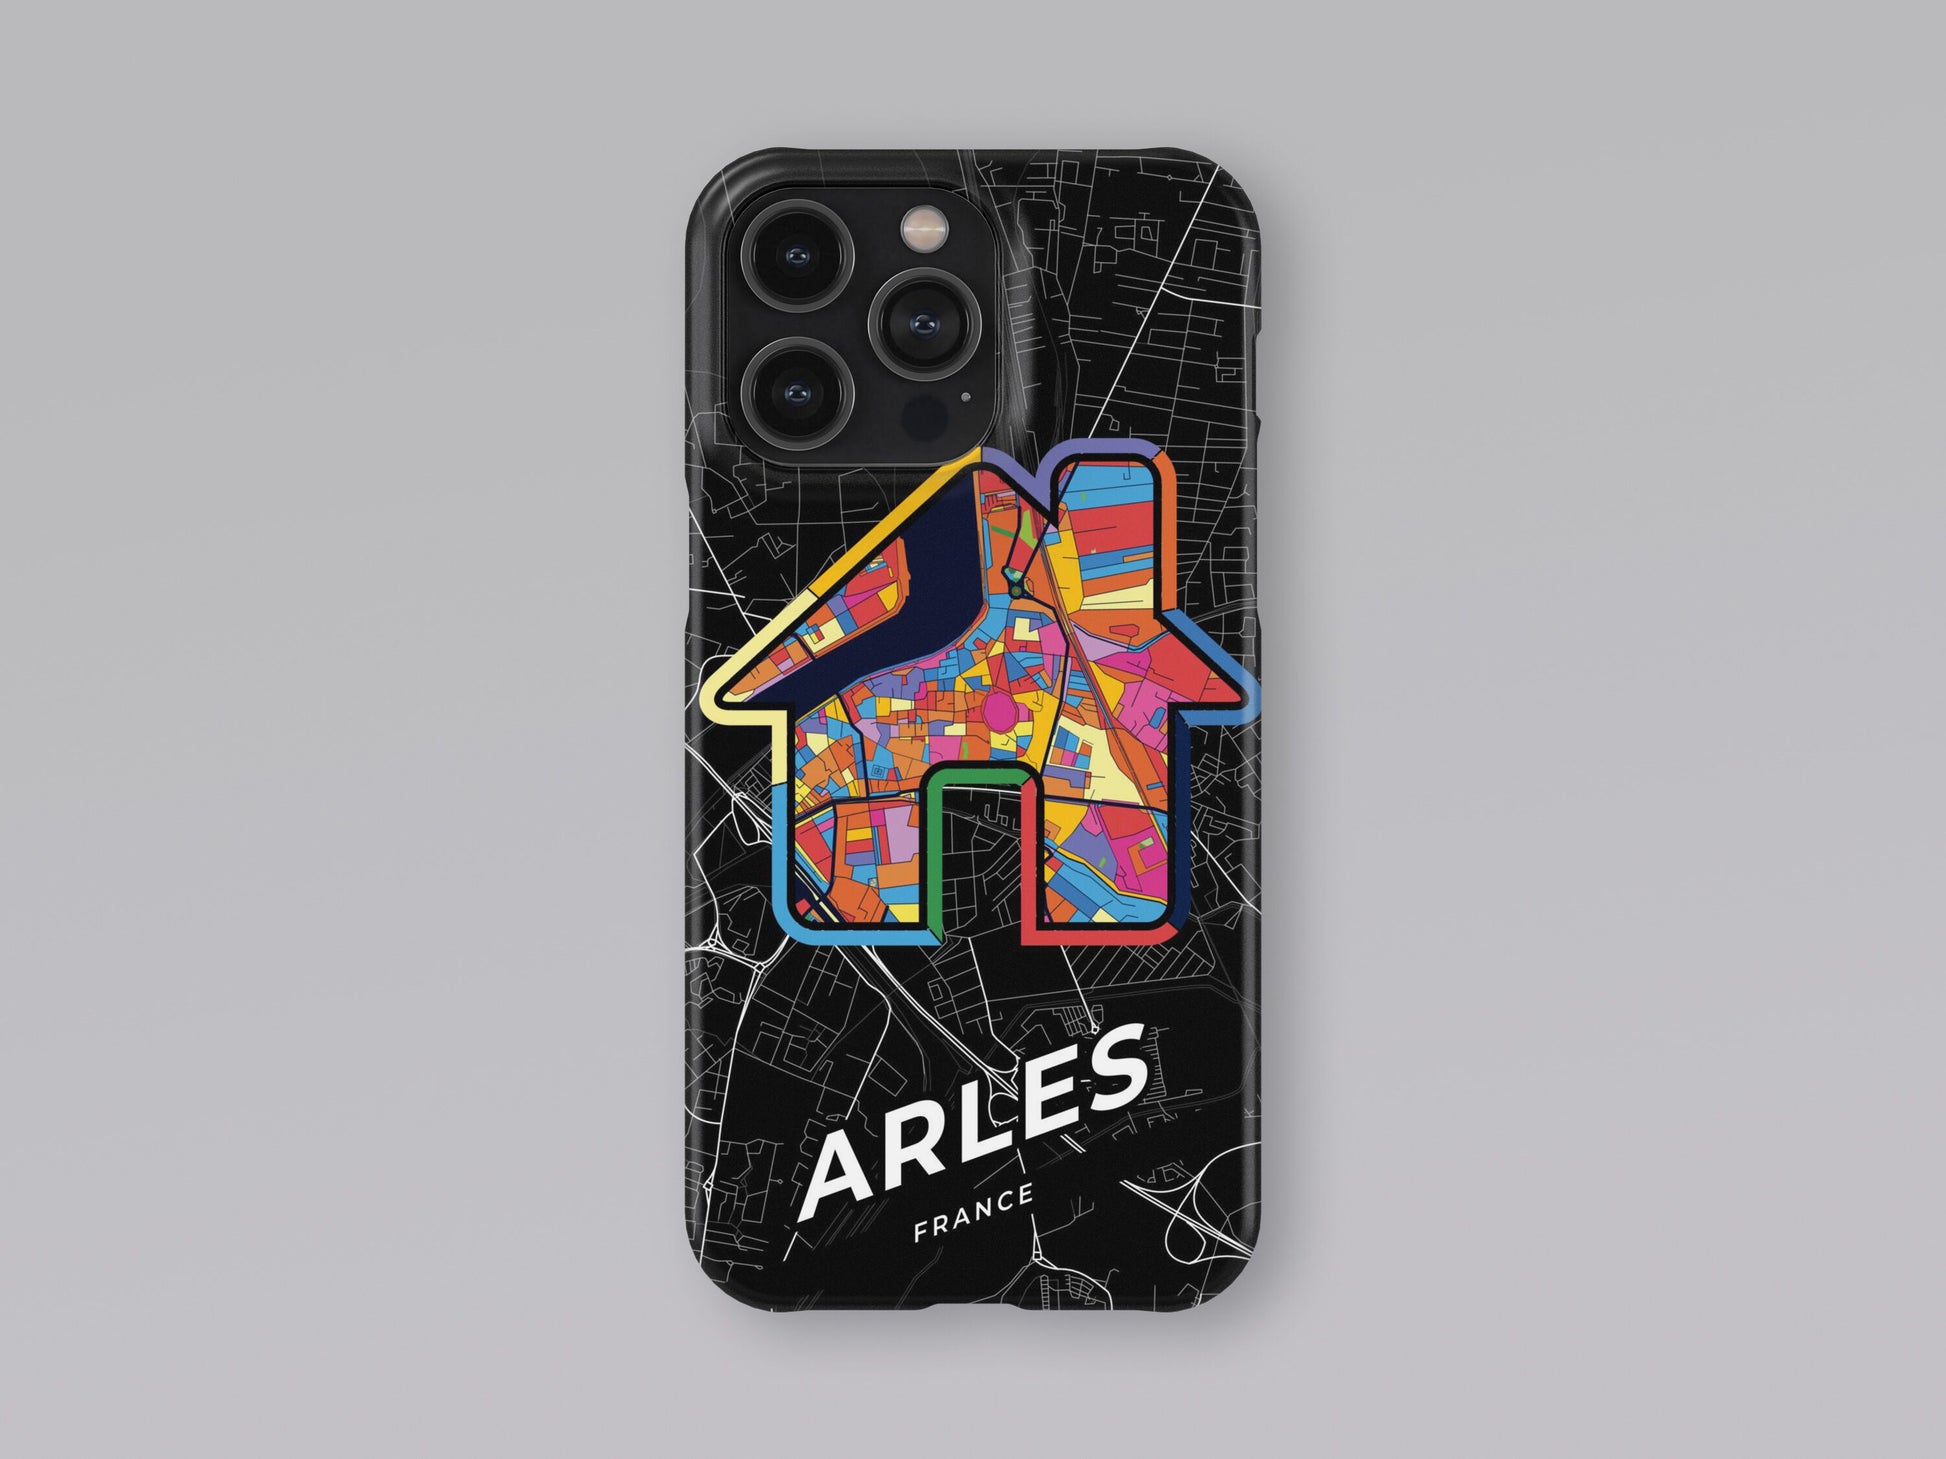 Arles France slim phone case with colorful icon. Birthday, wedding or housewarming gift. Couple match cases. 3